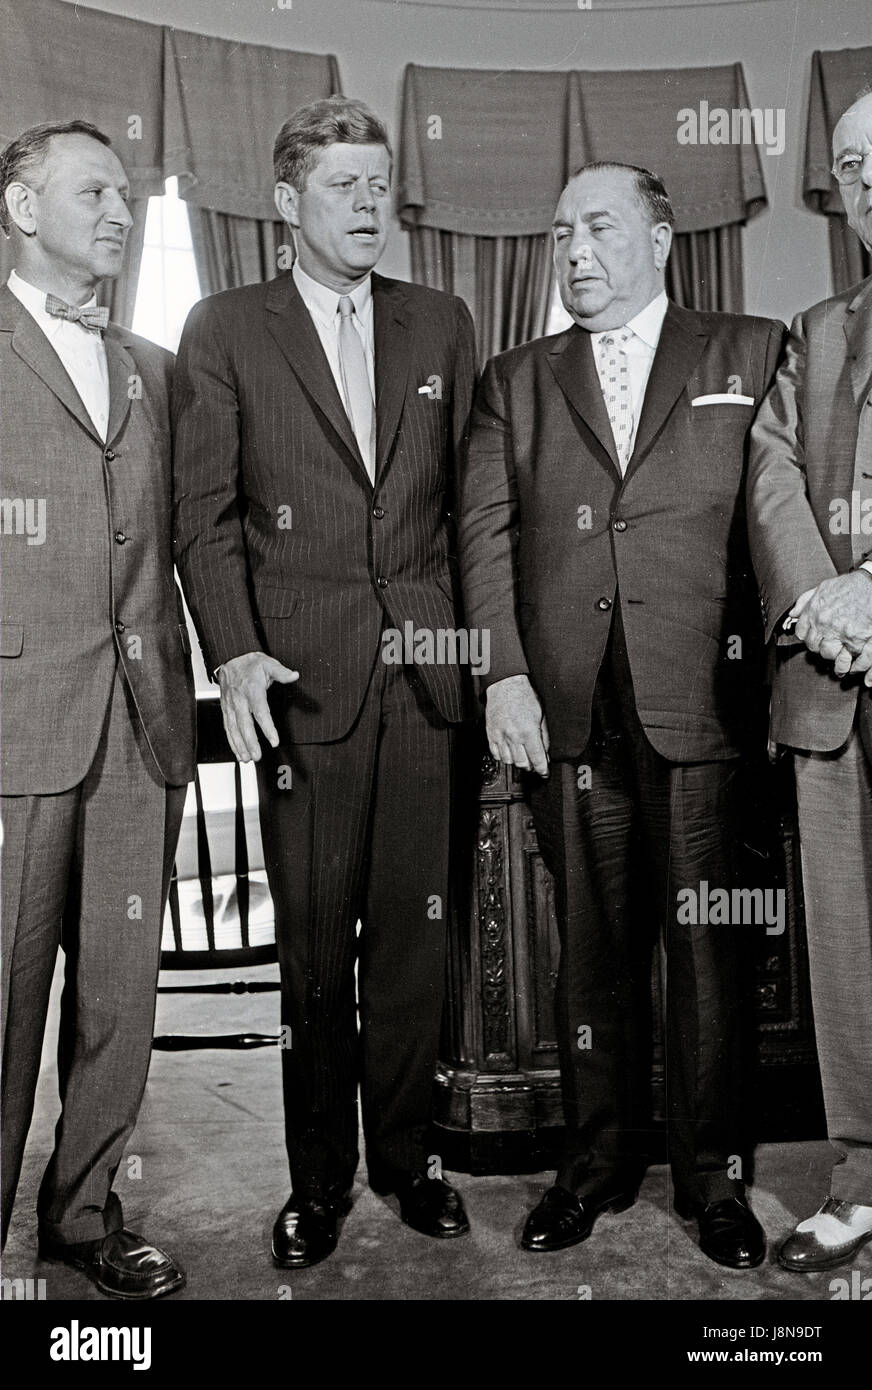 United States President John F. Kennedy meets Mayor Richard J. Daley (Democrat of Chicago) and officials from Illinois in the Oval Office of the White House in Washington, DC on July 11, 1962. From left to right: US Representative Sidney R. Yates (Democrat of Illinois); President Kennedy; Mayor Daley; US Representative Thomas J. O'Brien (Democrat of Illinois). Credit: Arnie Sachs/CNP /MediaPunch Stock Photo